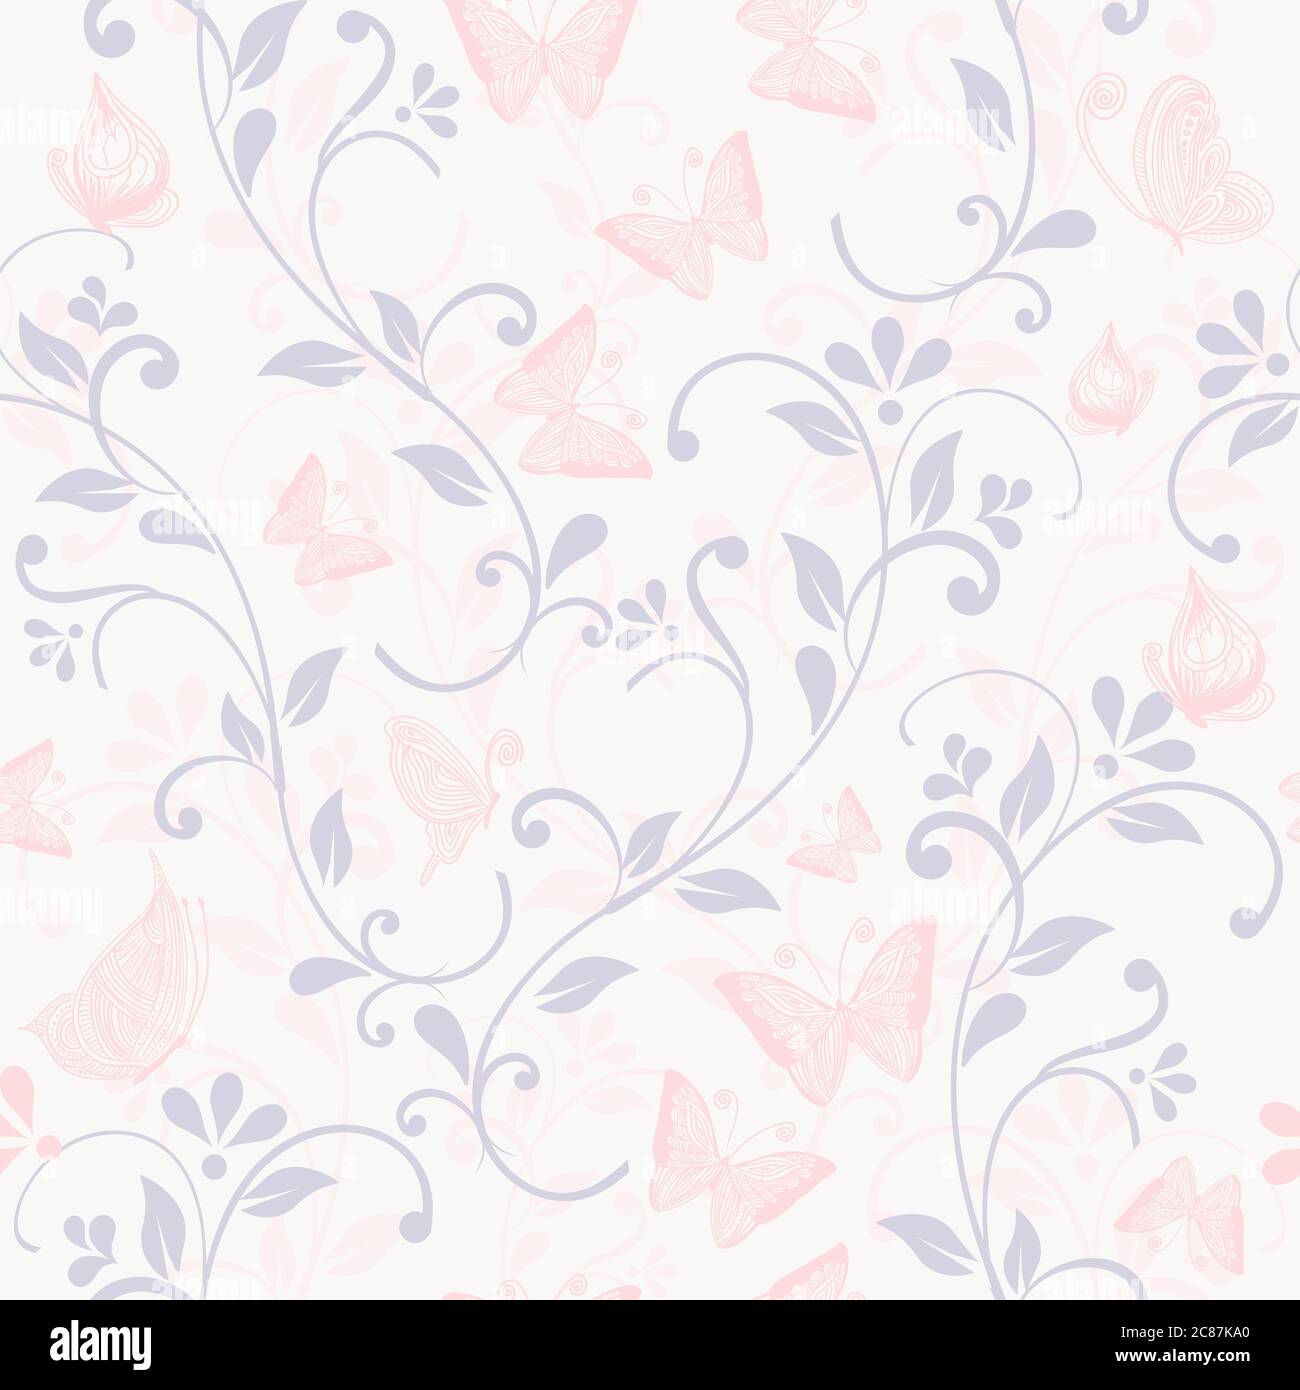 vector floral seamless pattern with flowers and butterflies Stock Vector